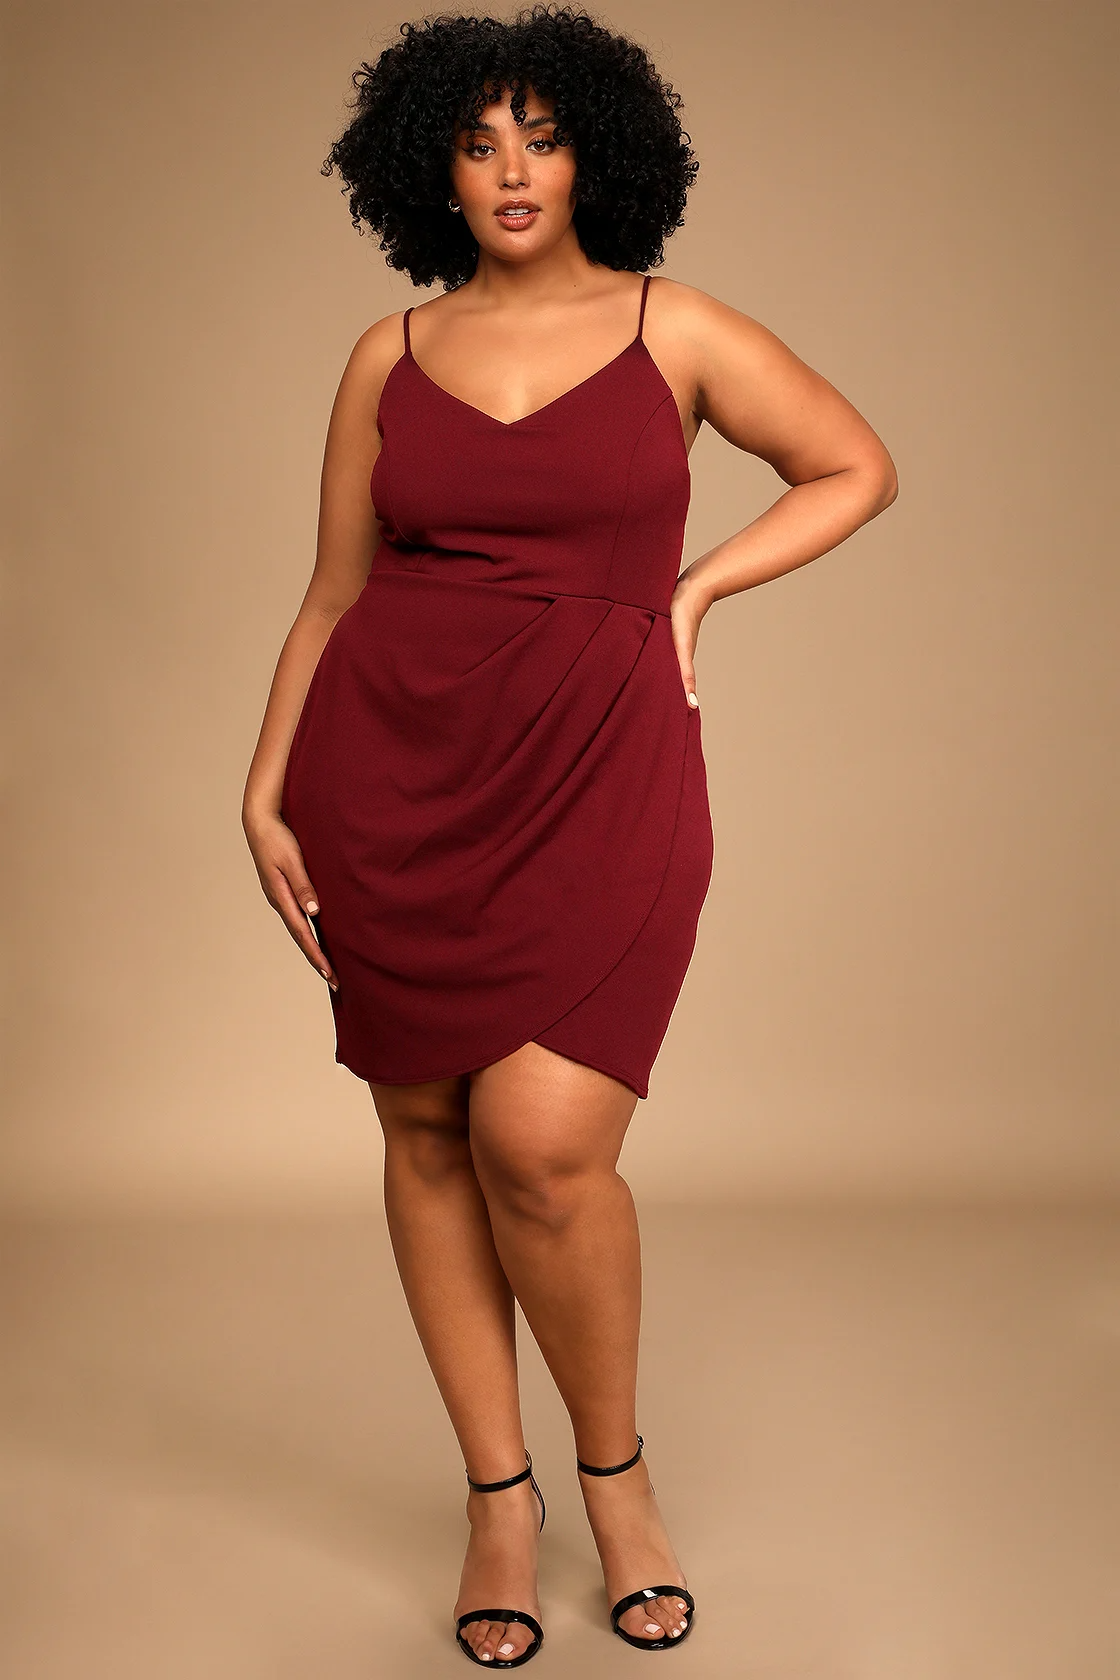 Plus Size Dresses  New Collection And Good Quality Plus Size